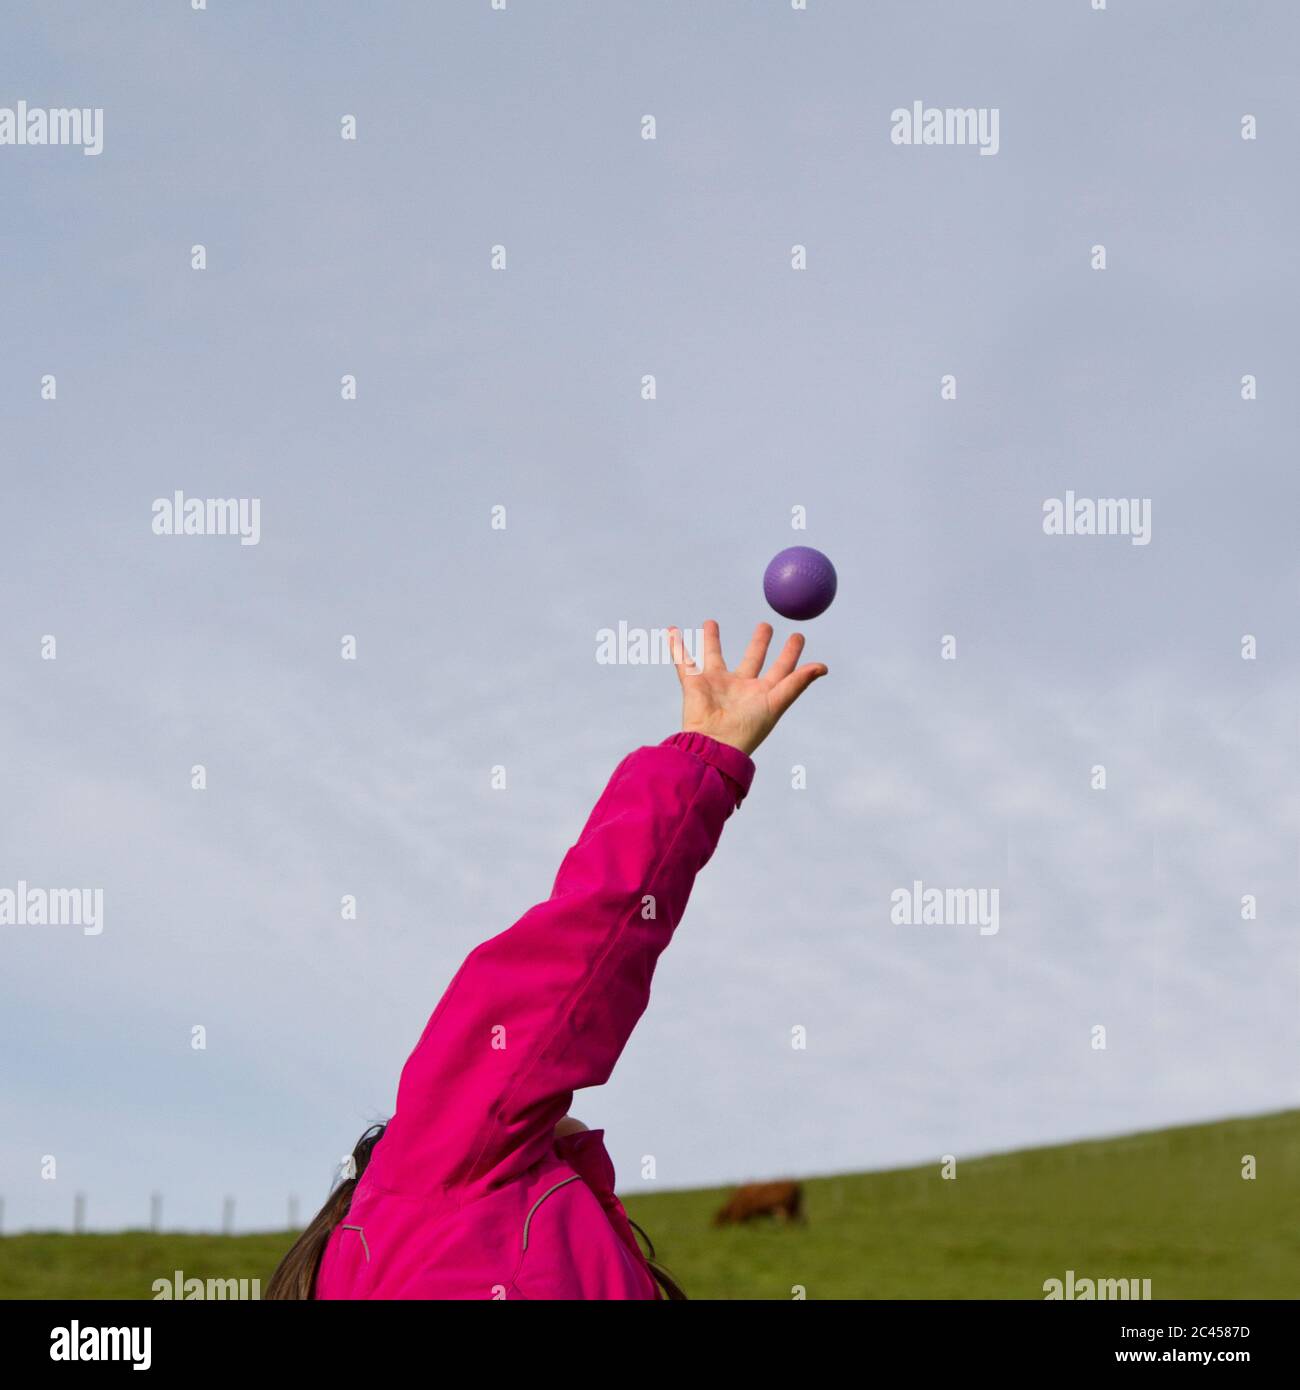 Young girl catching a ball Stock Photo